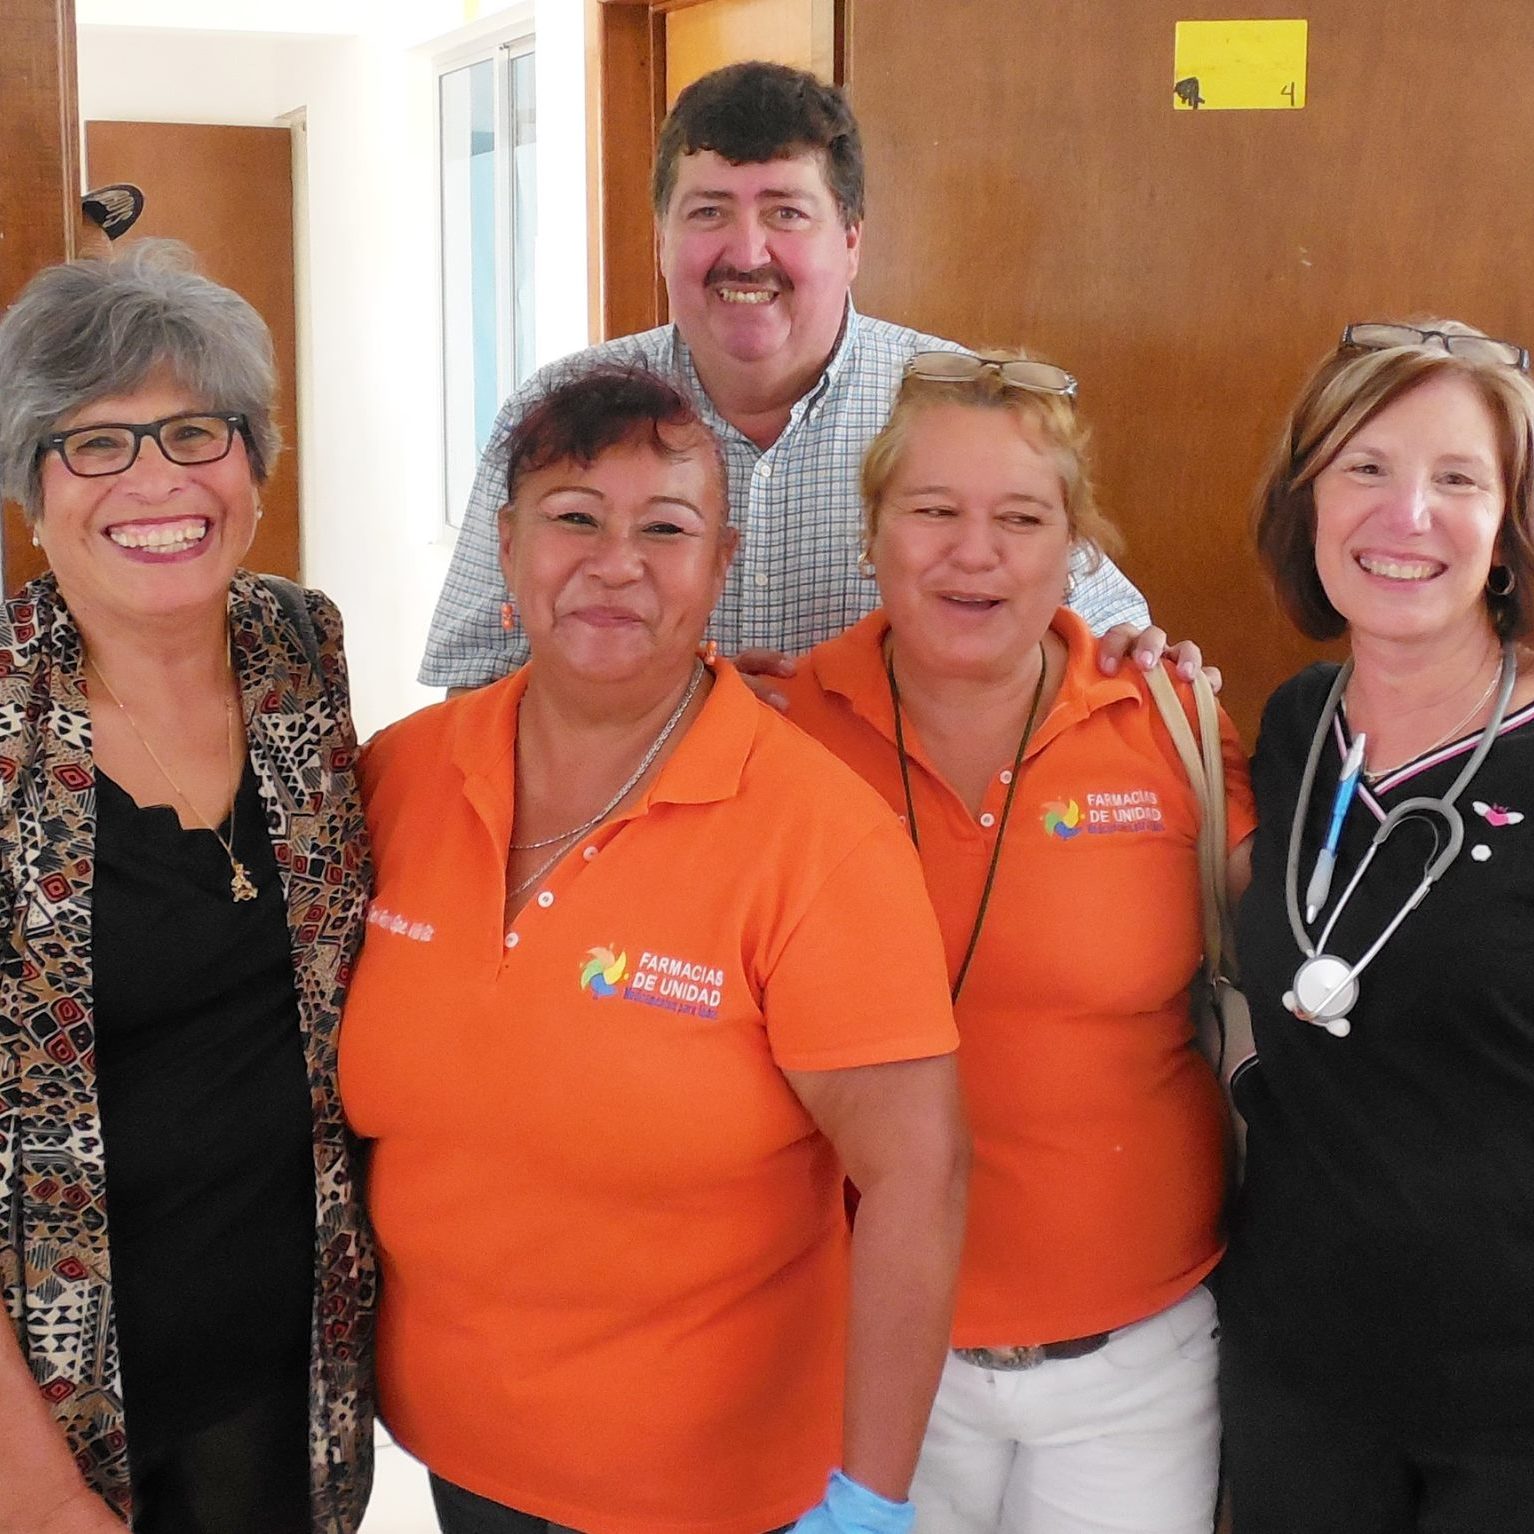 Dr. Valdes of Mexico stops by the pharmacy- pictured here with AMO volunteers Gricelda and Skoshi, and DIF staff.